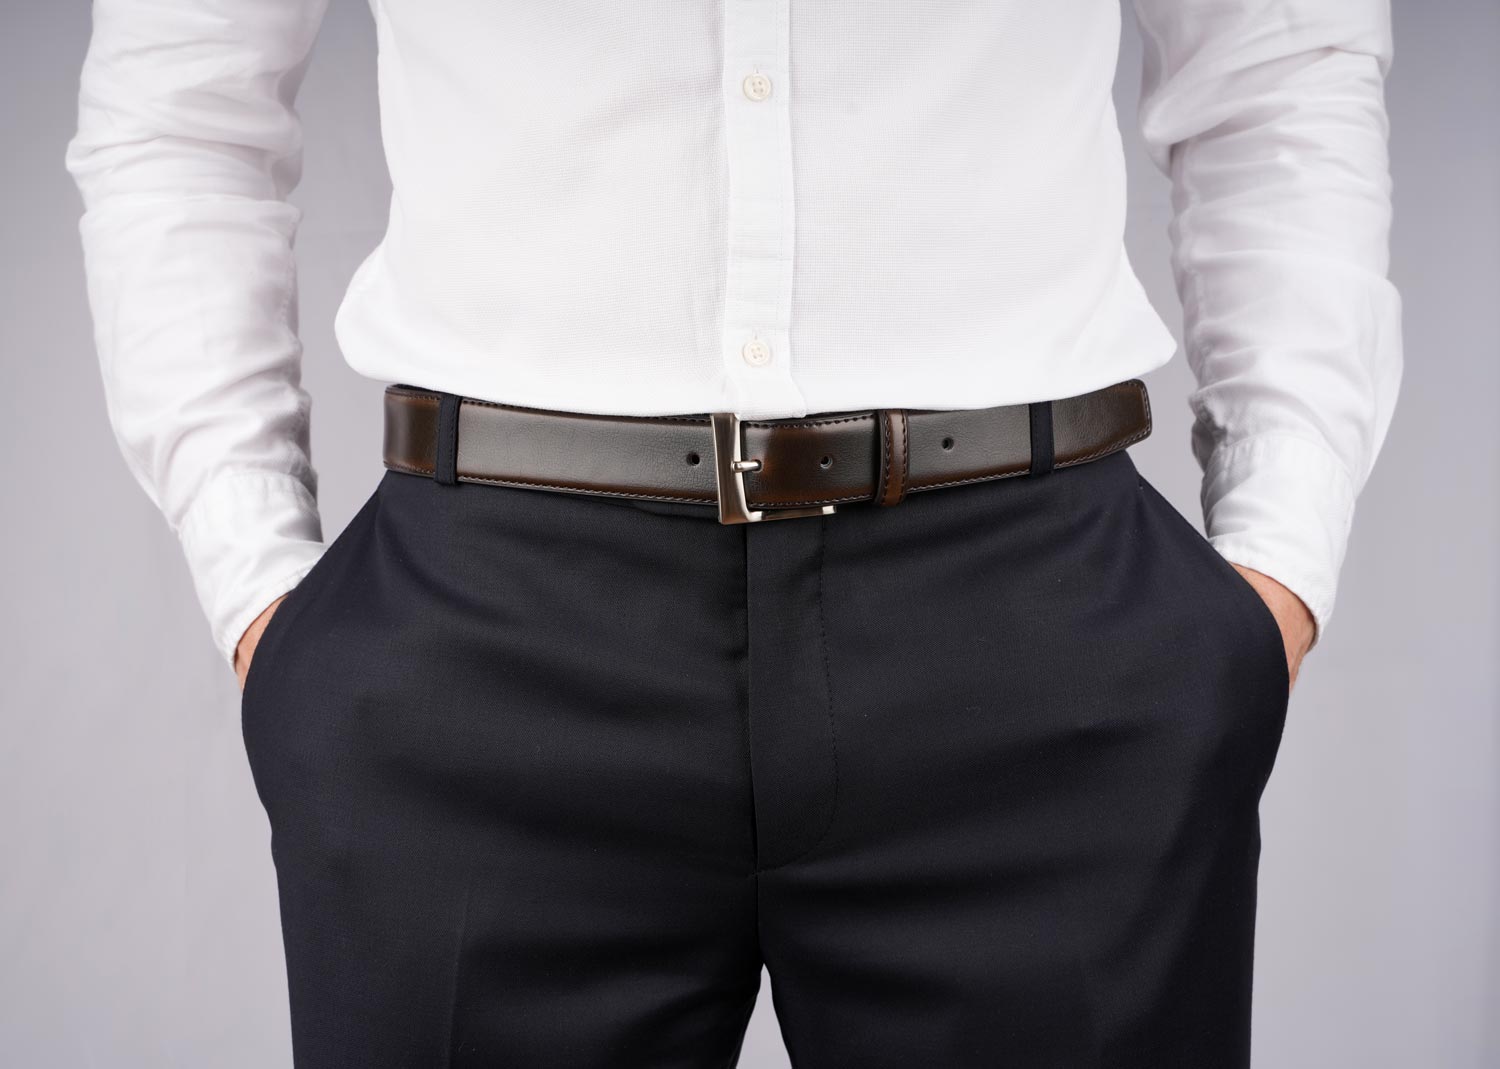 Men's Formal Belts - Elevate Your Style